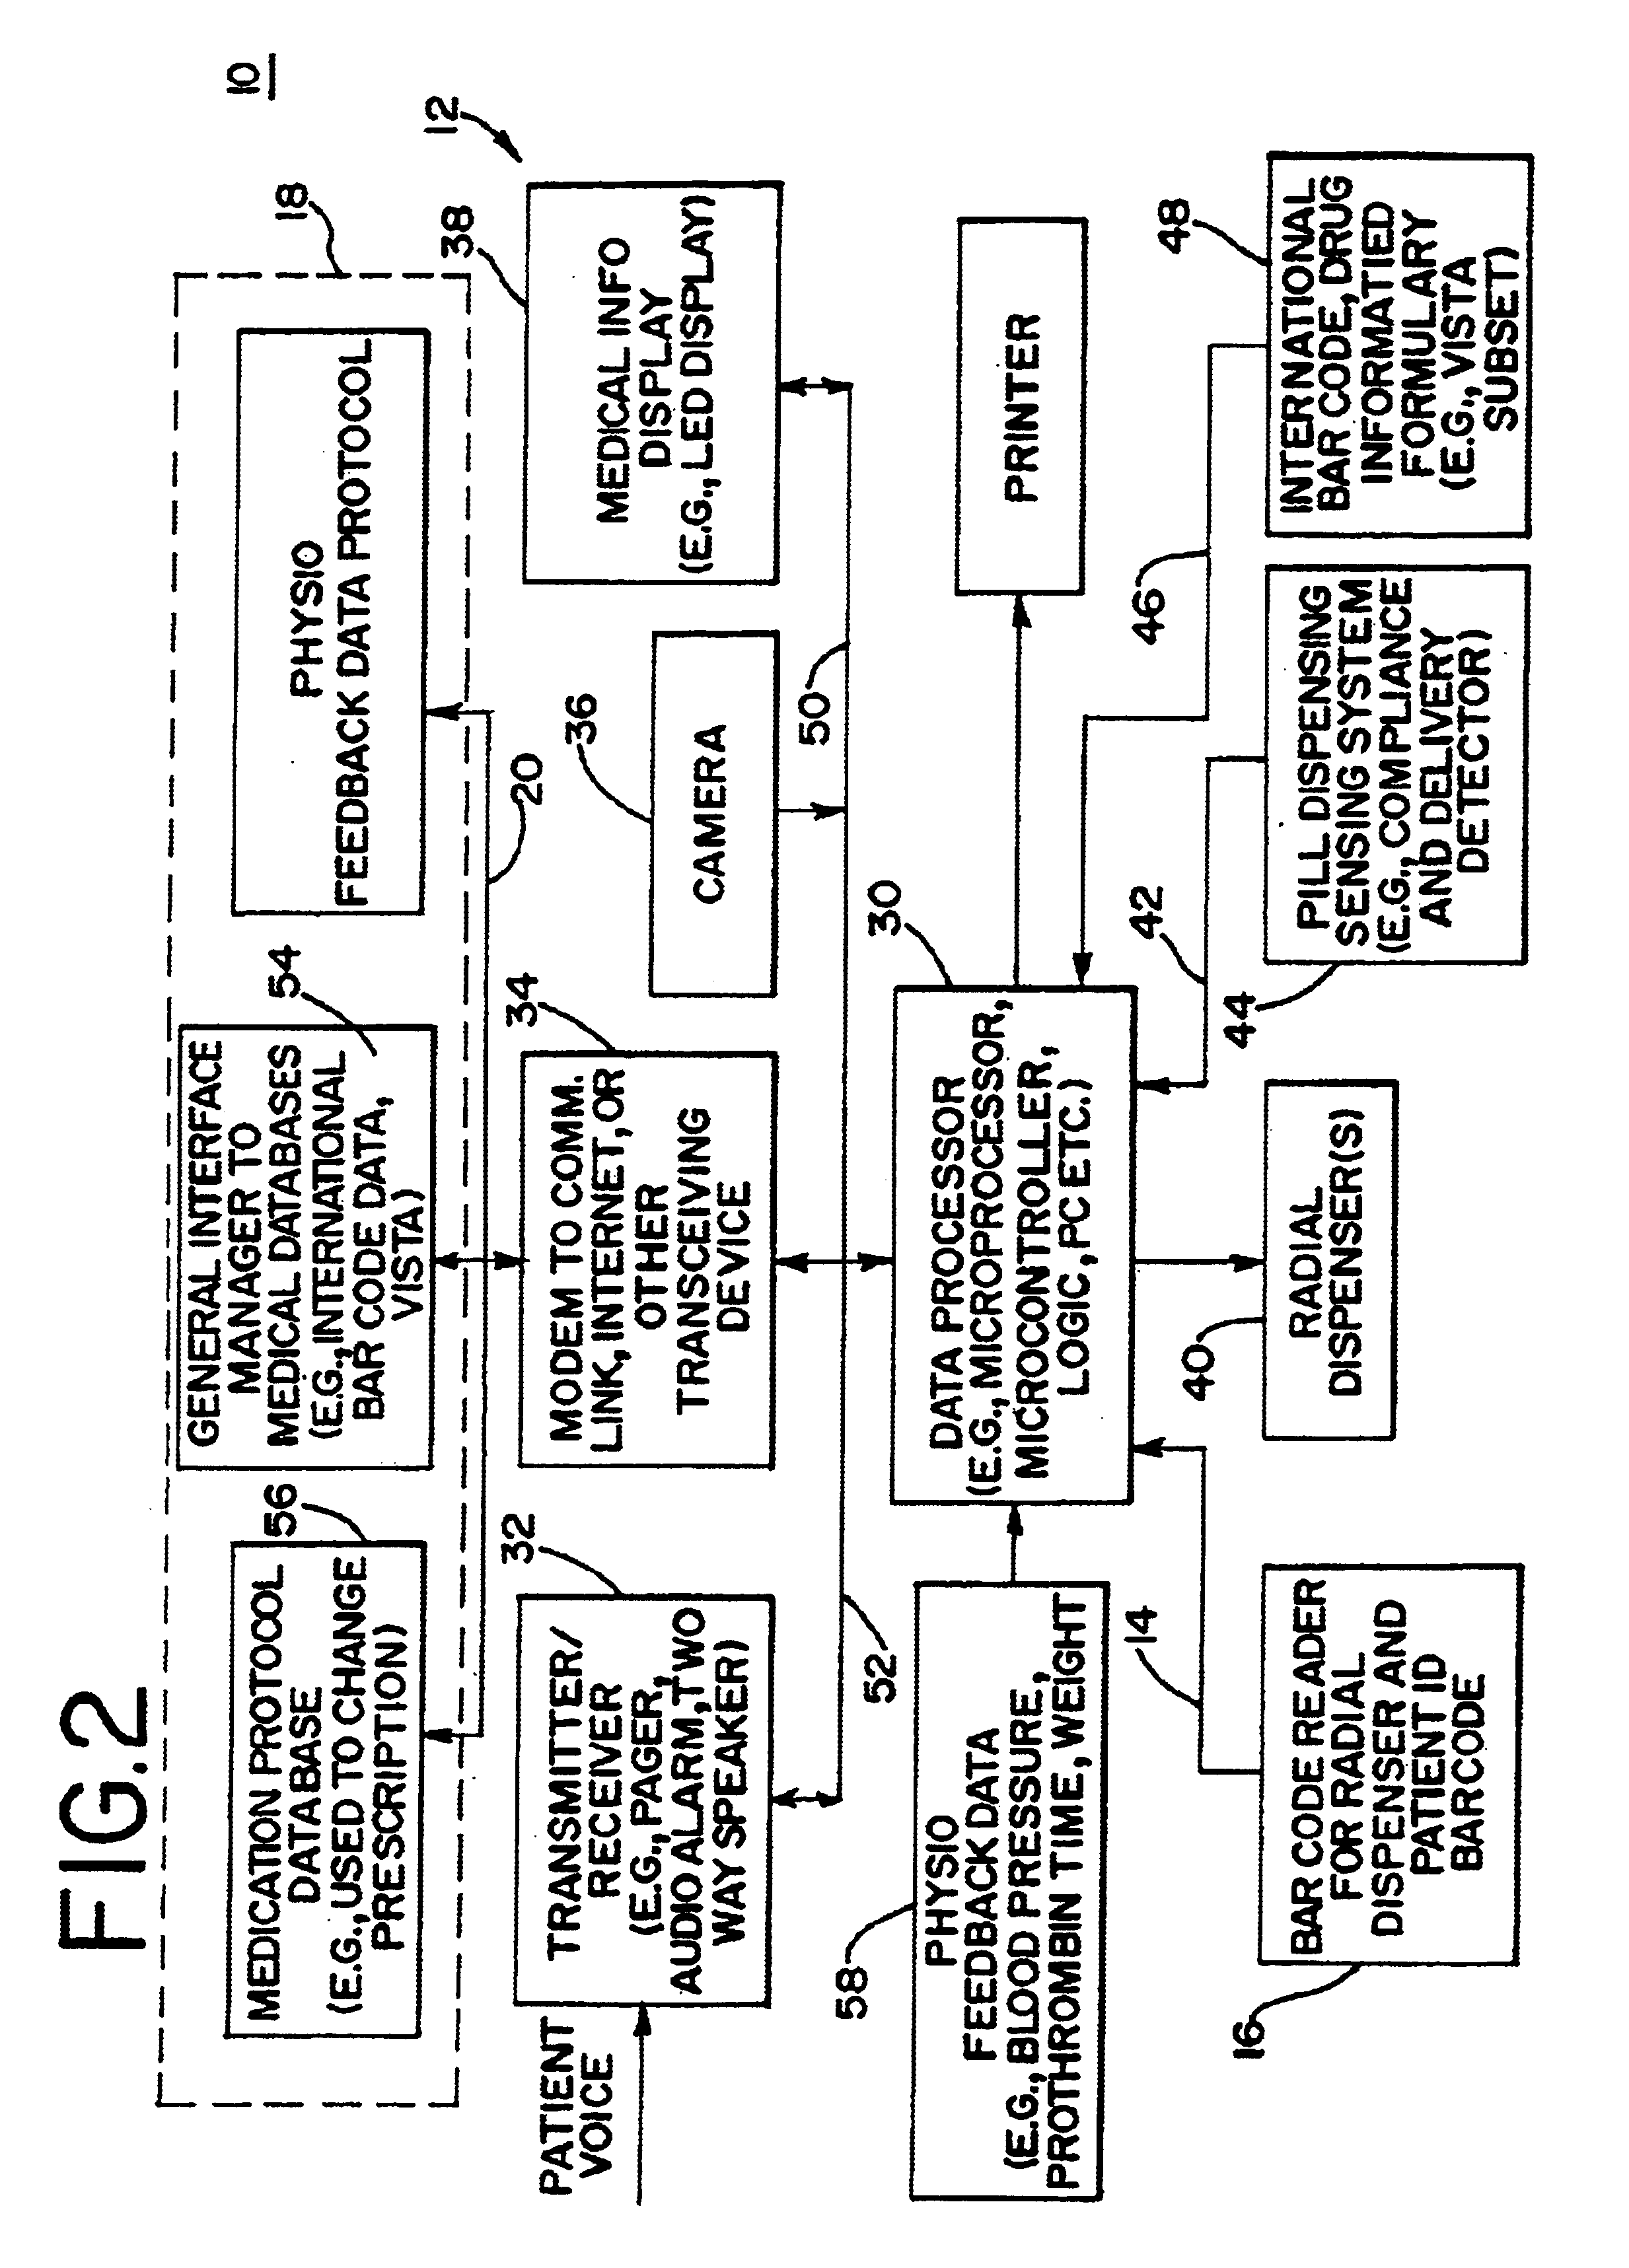 Automated portable medication radial dispensing apparatus and method using a carrier tape